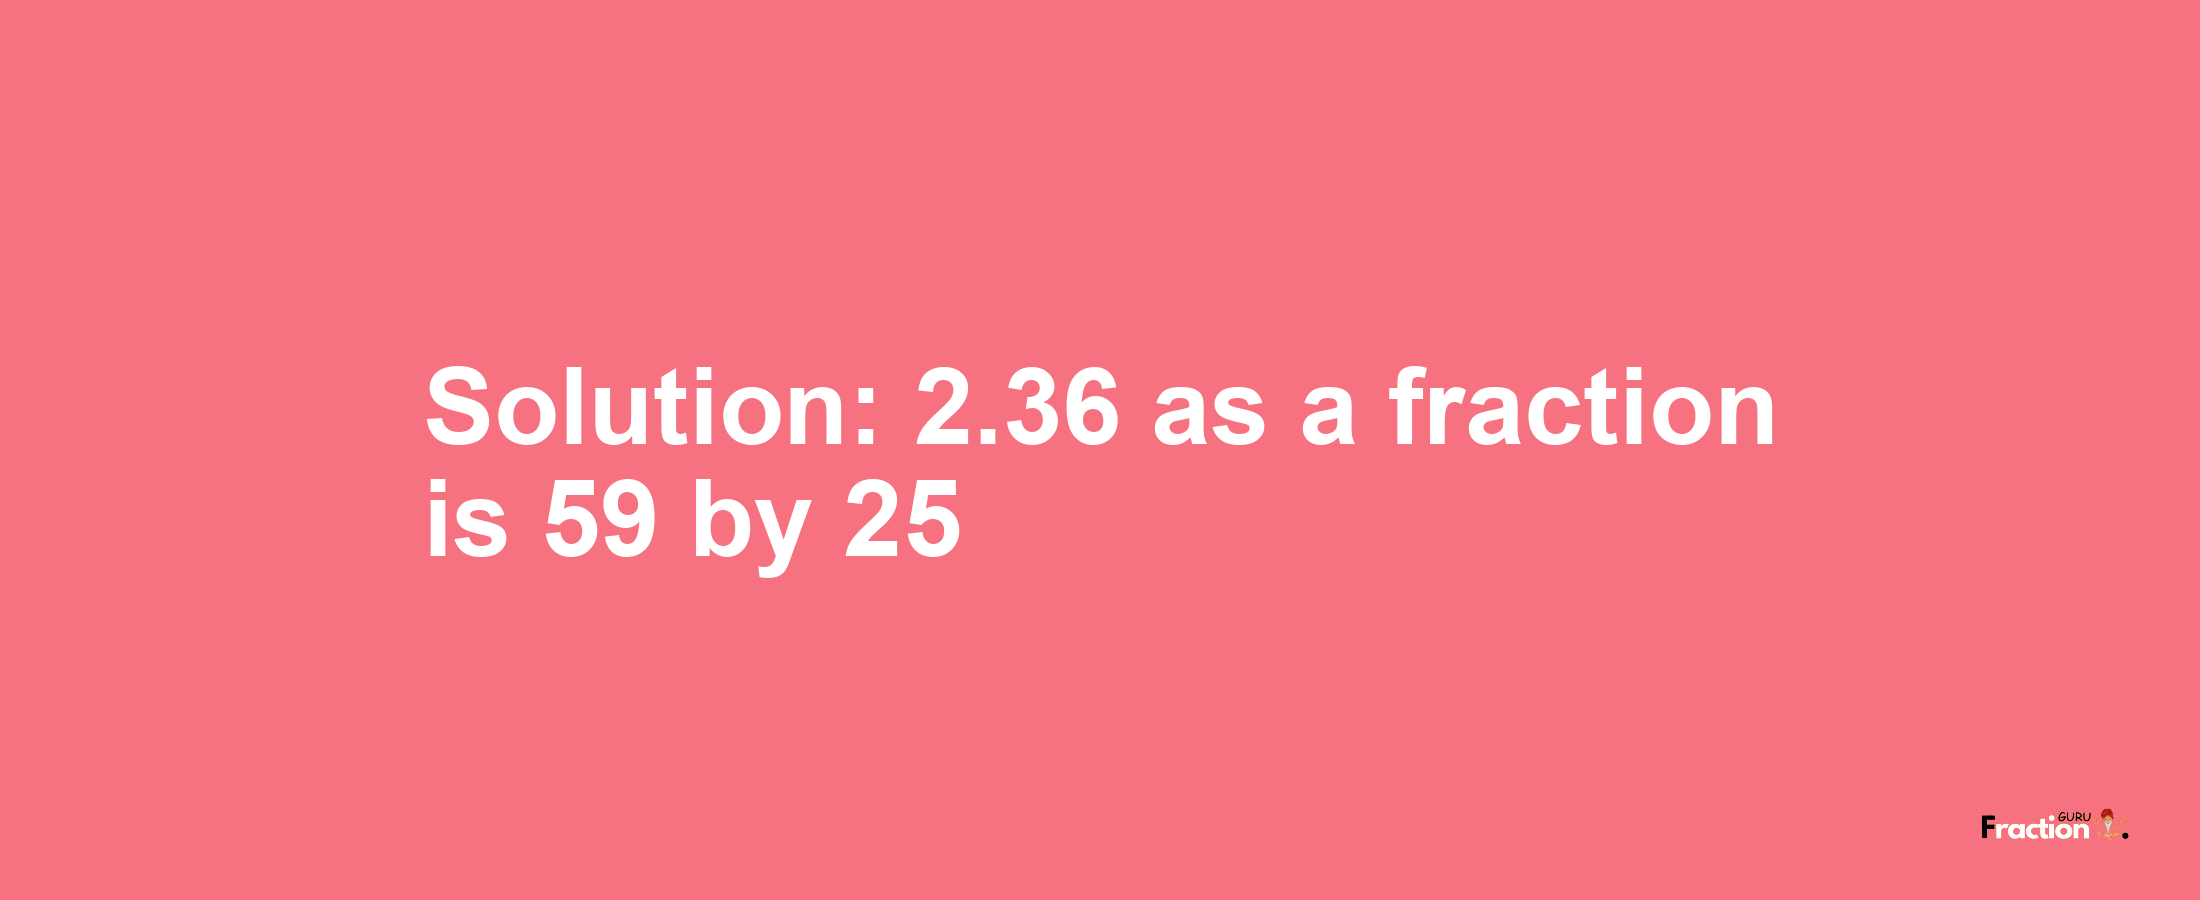 Solution:2.36 as a fraction is 59/25